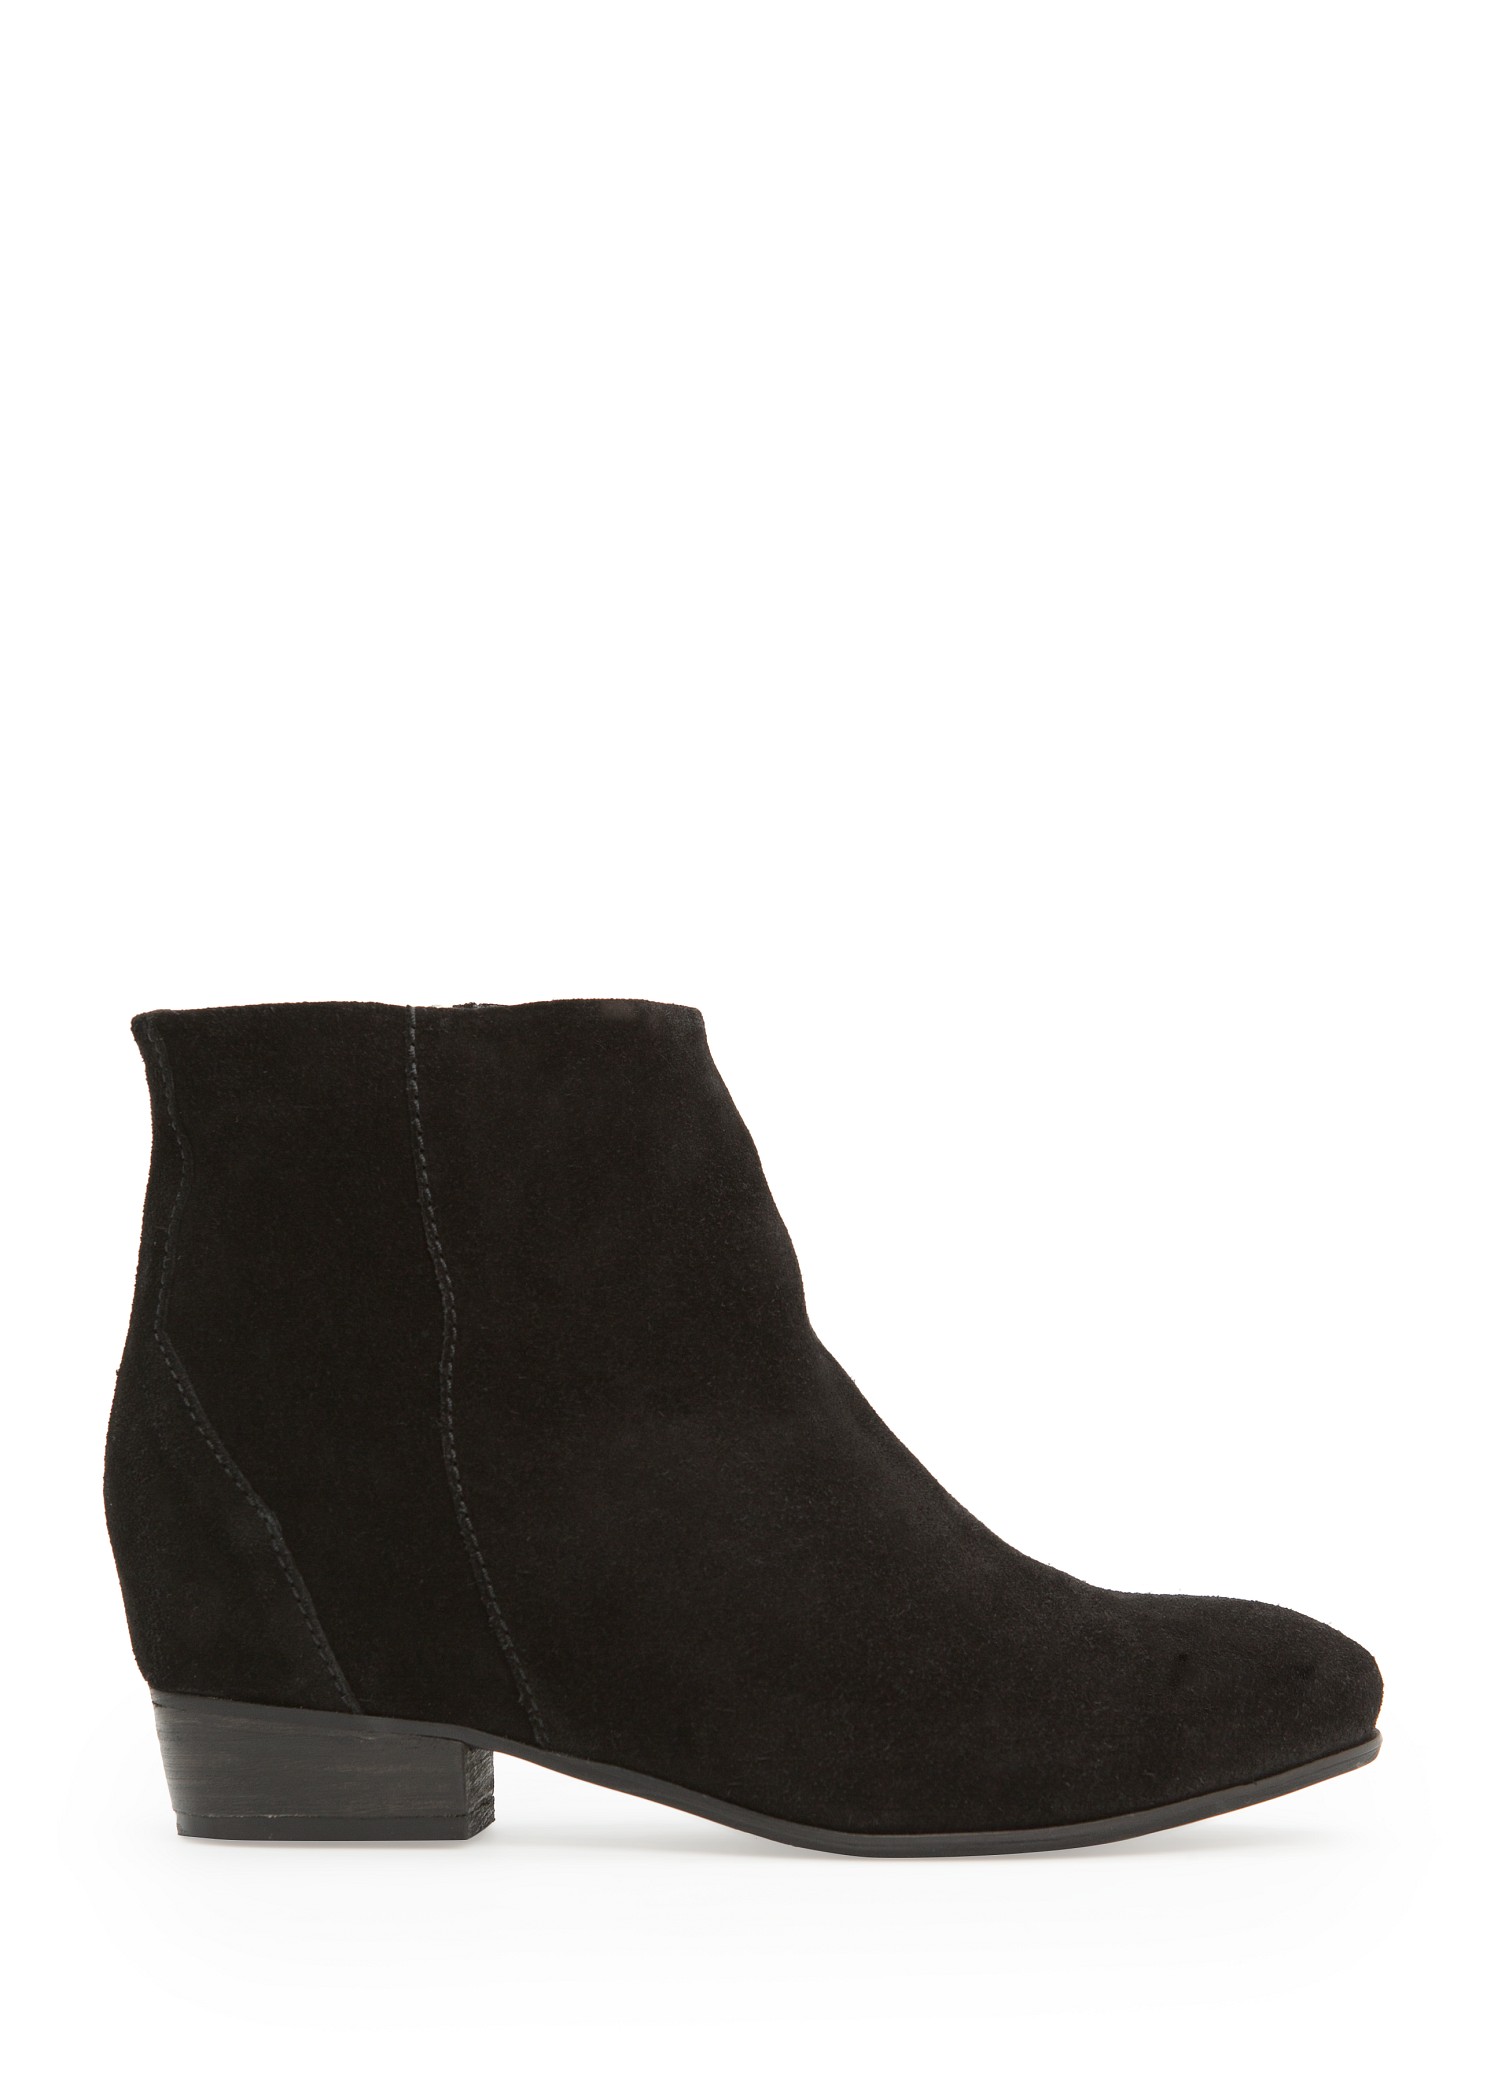 Mango Zipper Suede Ankle Boots in Black | Lyst